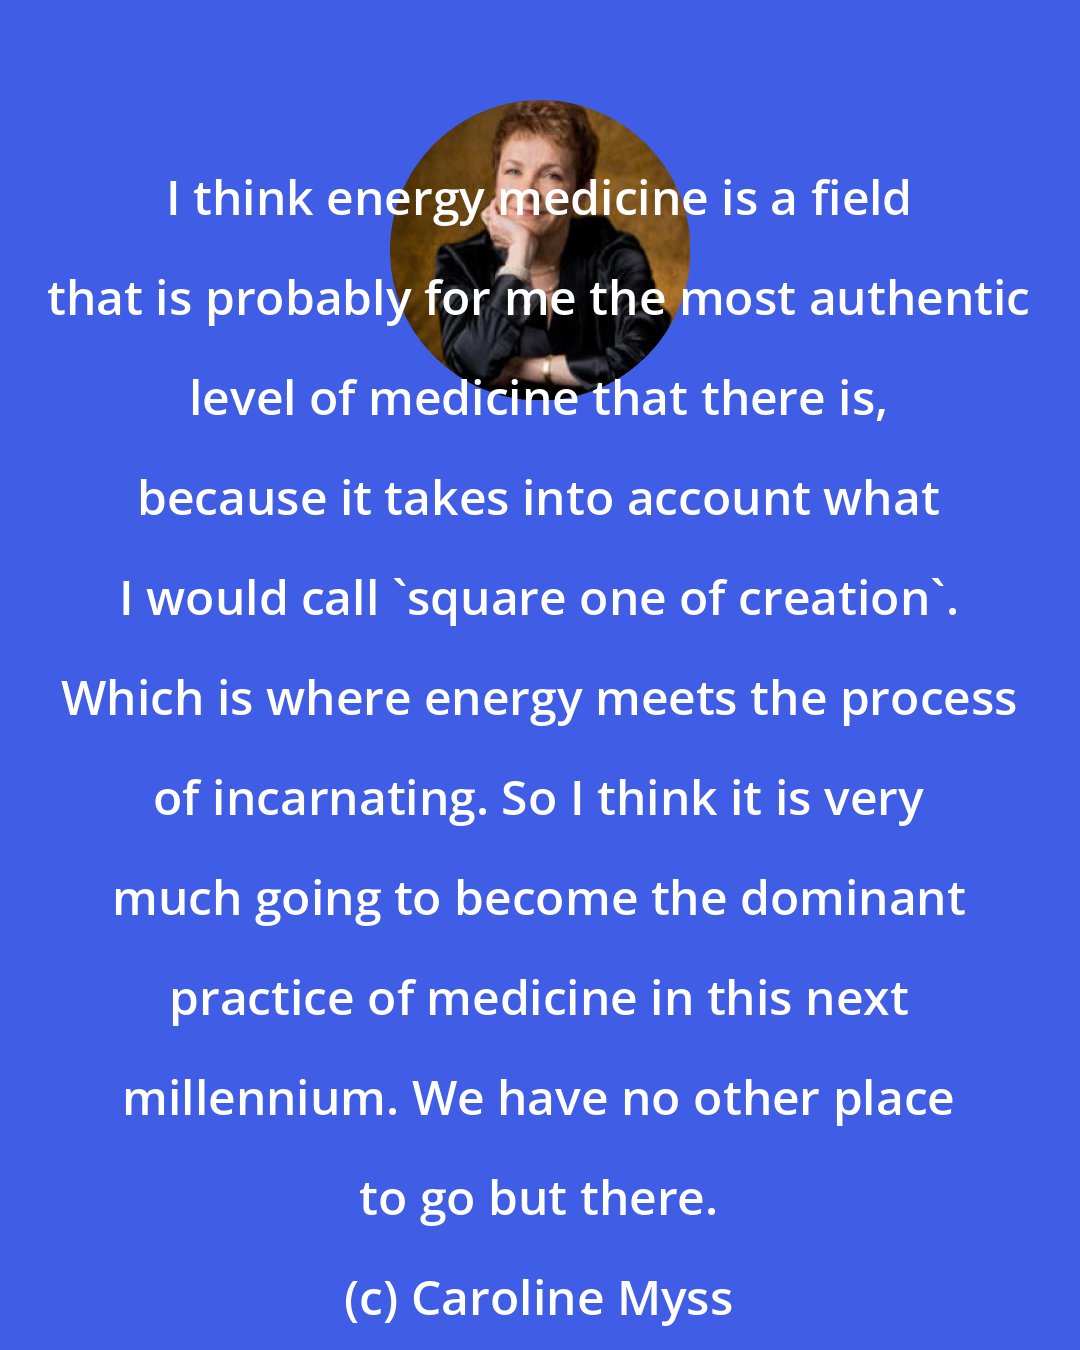 Caroline Myss: I think energy medicine is a field that is probably for me the most authentic level of medicine that there is, because it takes into account what I would call 'square one of creation'. Which is where energy meets the process of incarnating. So I think it is very much going to become the dominant practice of medicine in this next millennium. We have no other place to go but there.